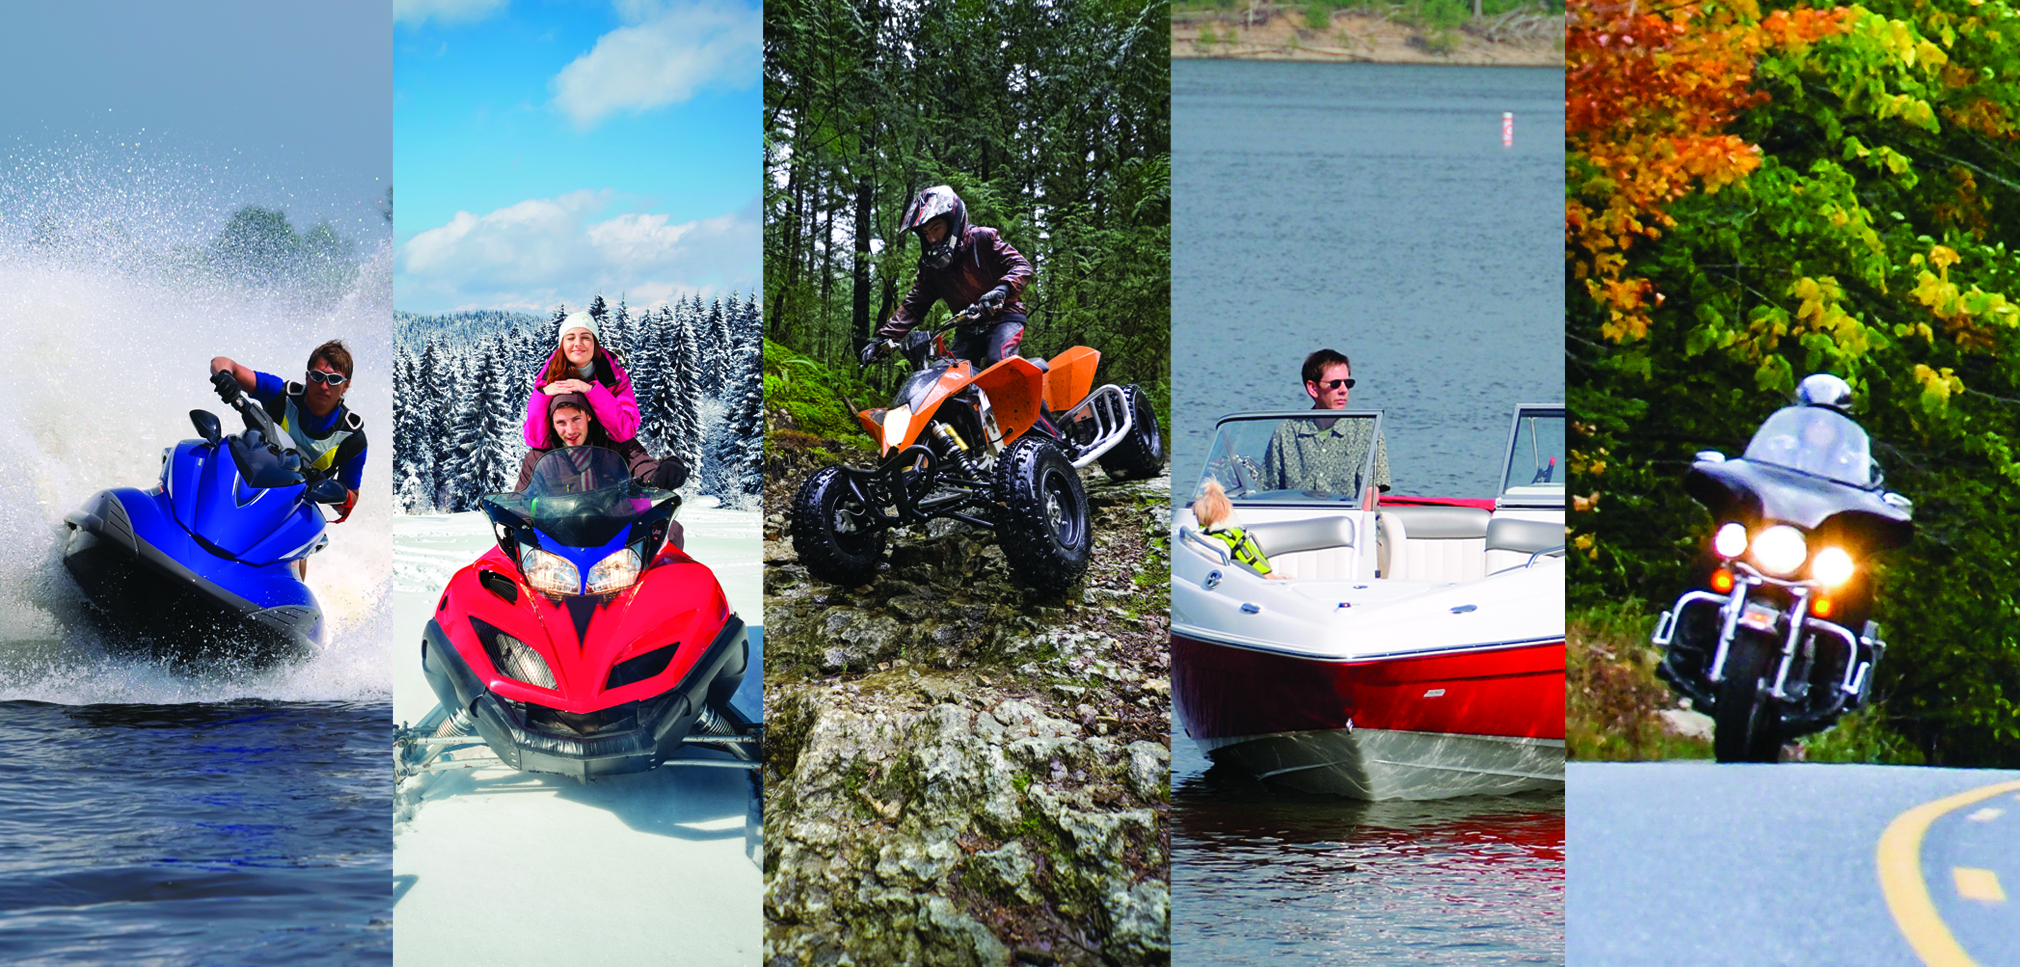 Compilation of photos of active motorized sports Watercraft spraying water, snowmobiling couple, atv going over rocks, man in powerboat, motorcycle on road in fall